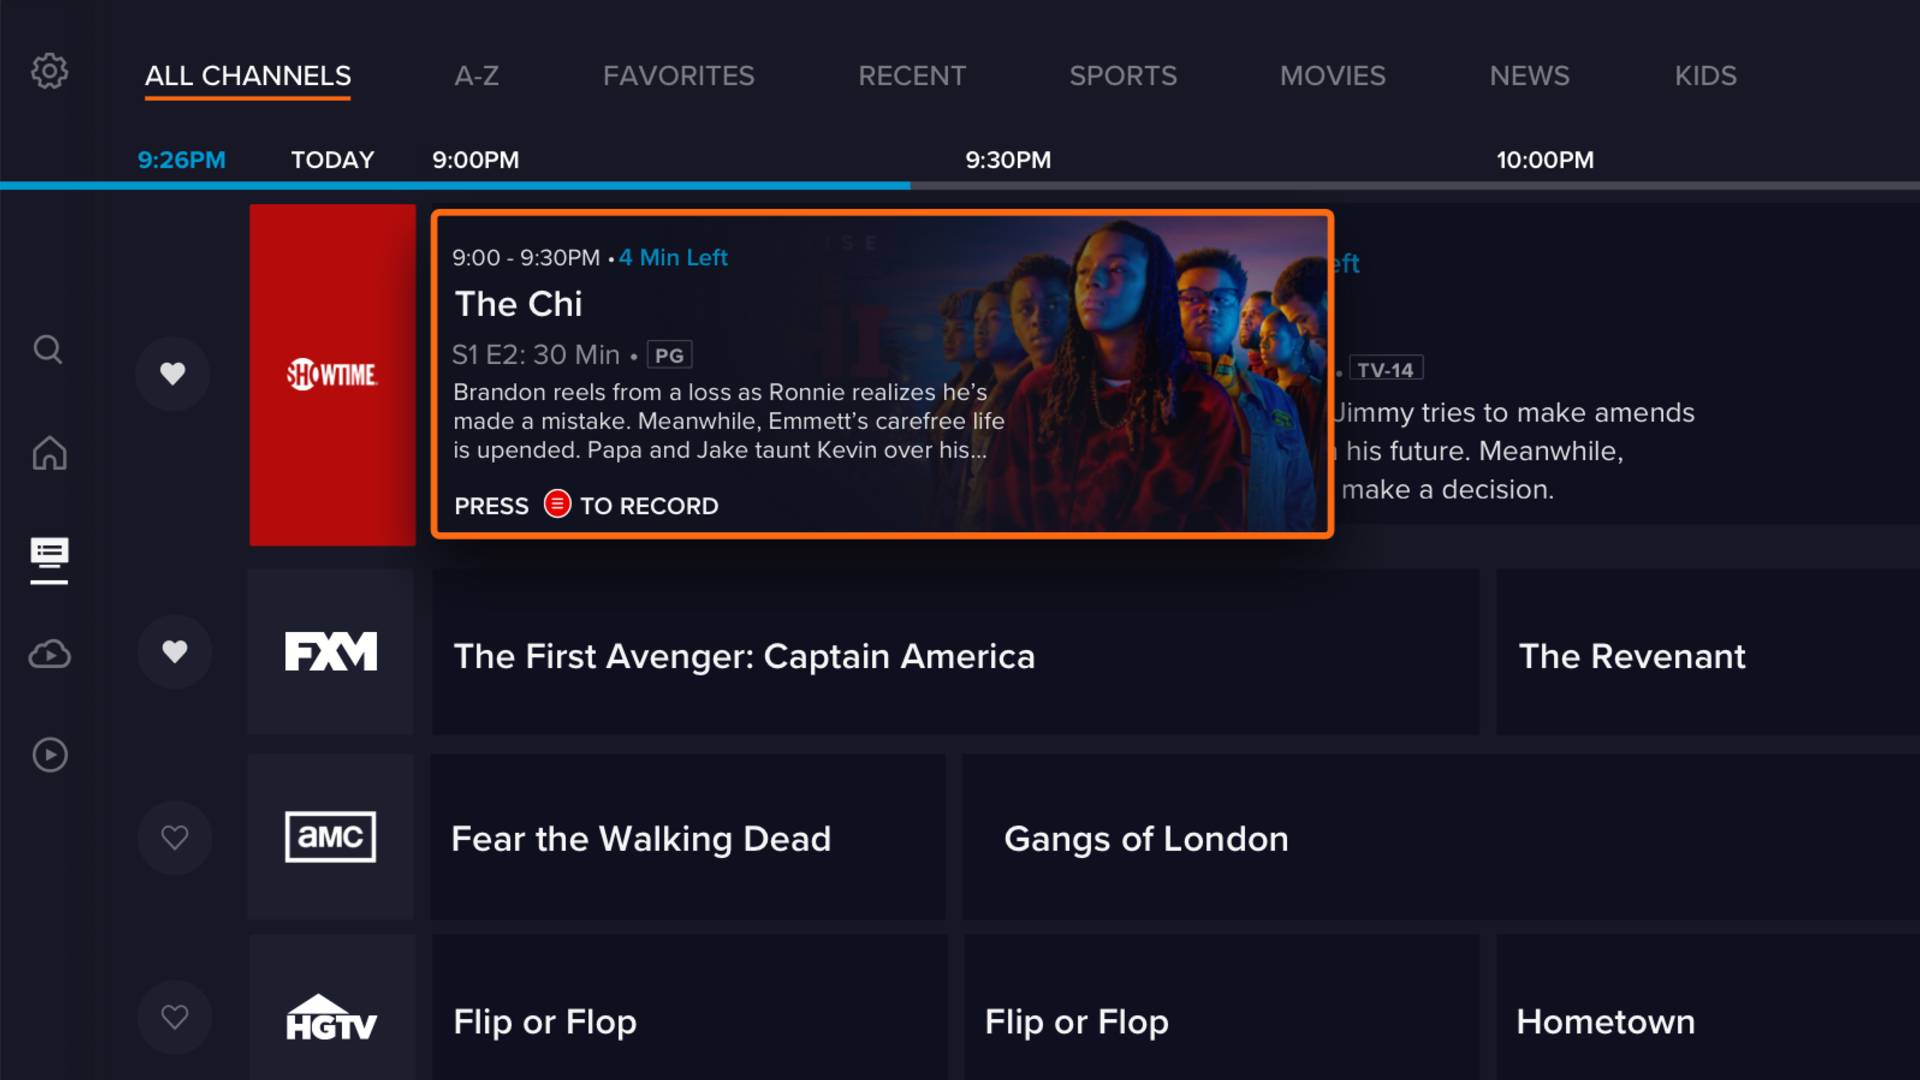 Sling TV is rolling out a much-improved app